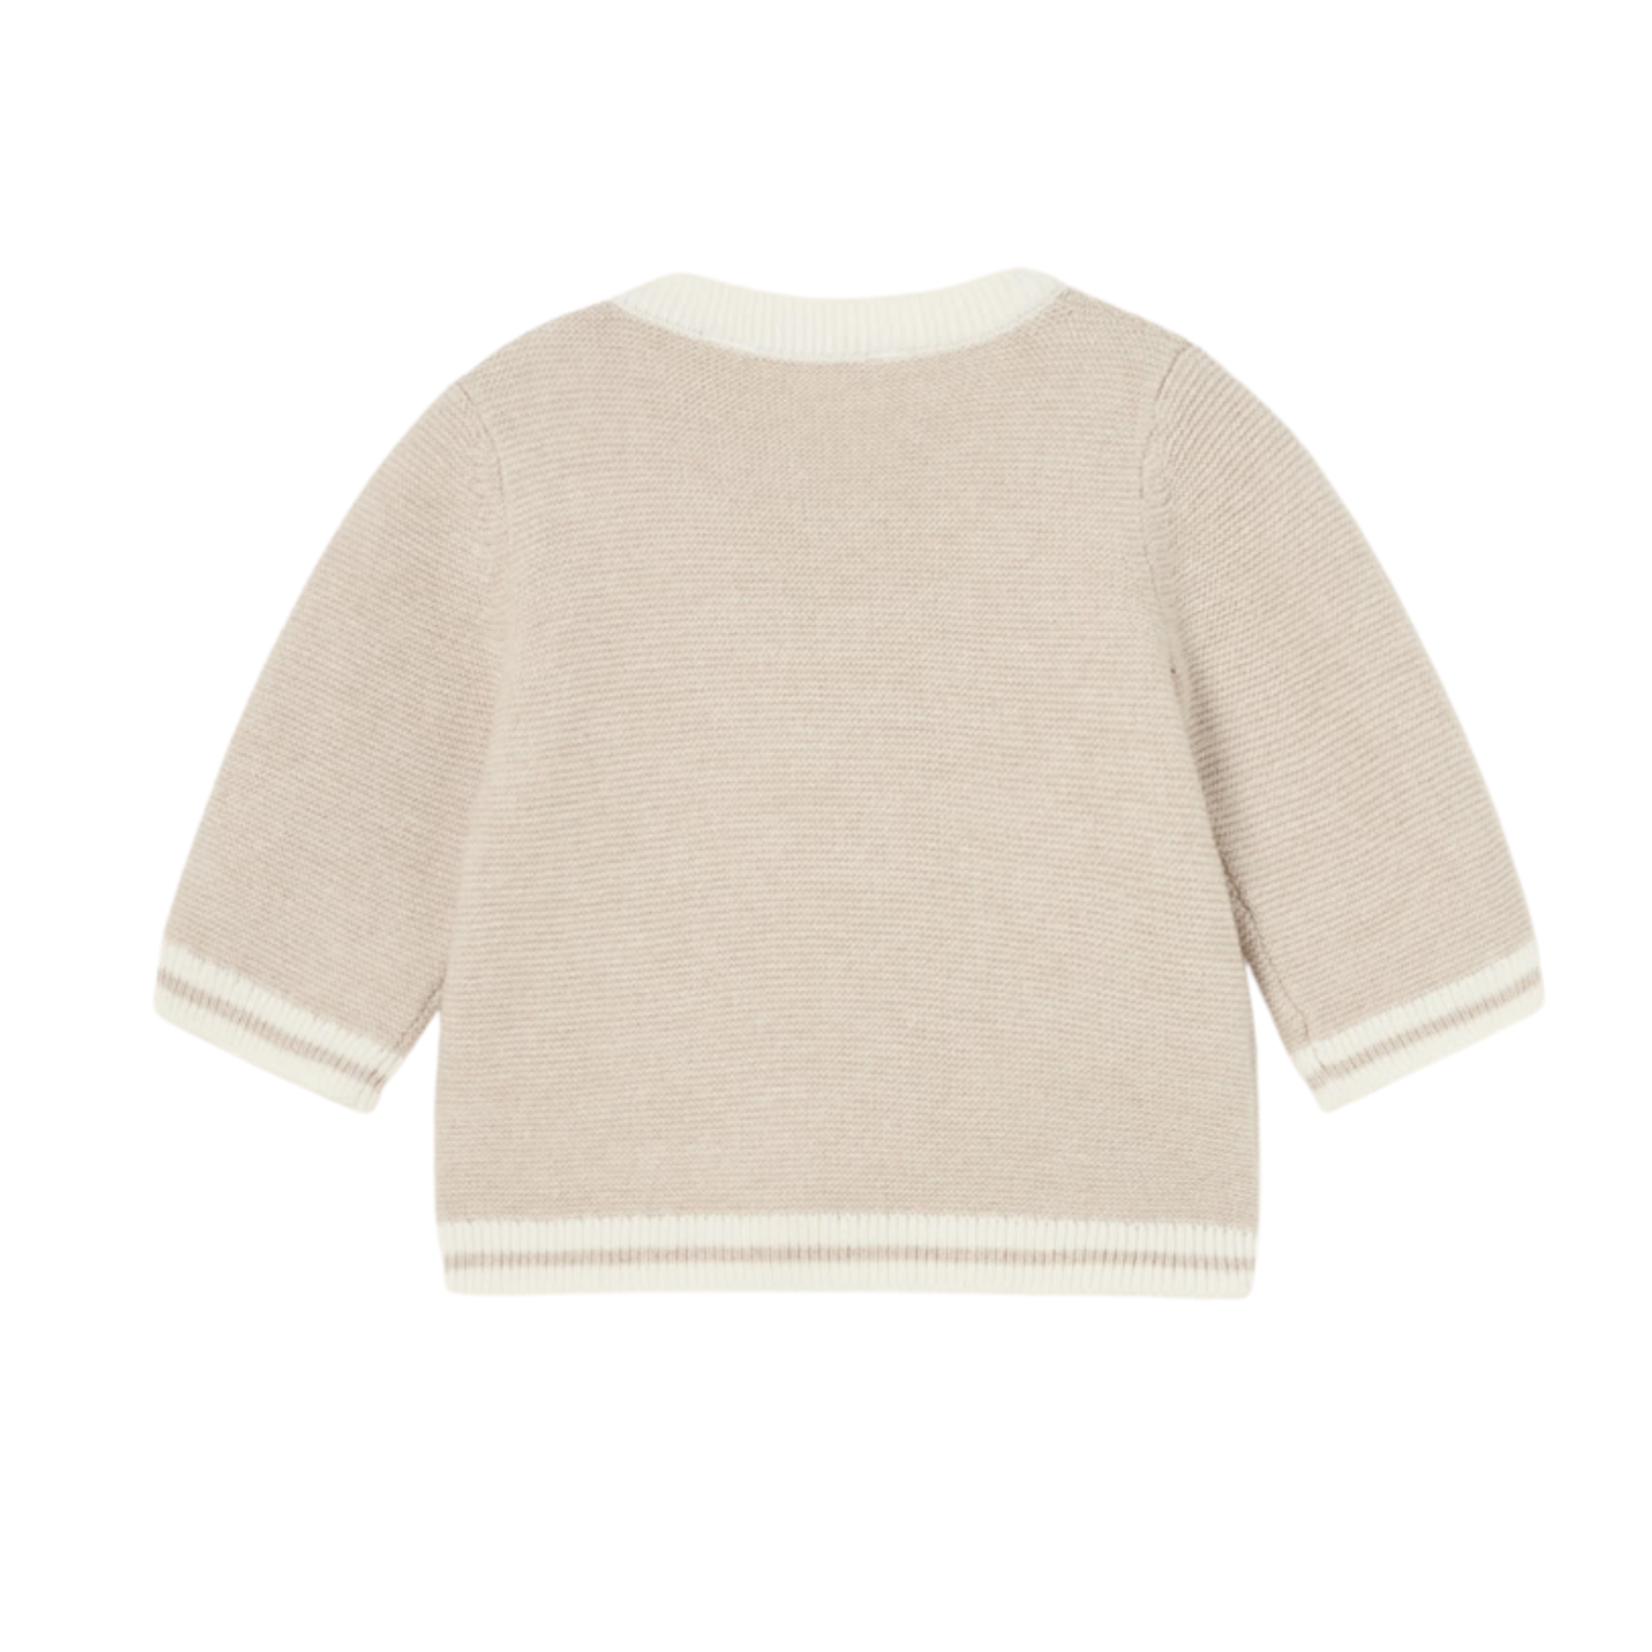 Mayoral Mayoral - Trui knit sweater beige